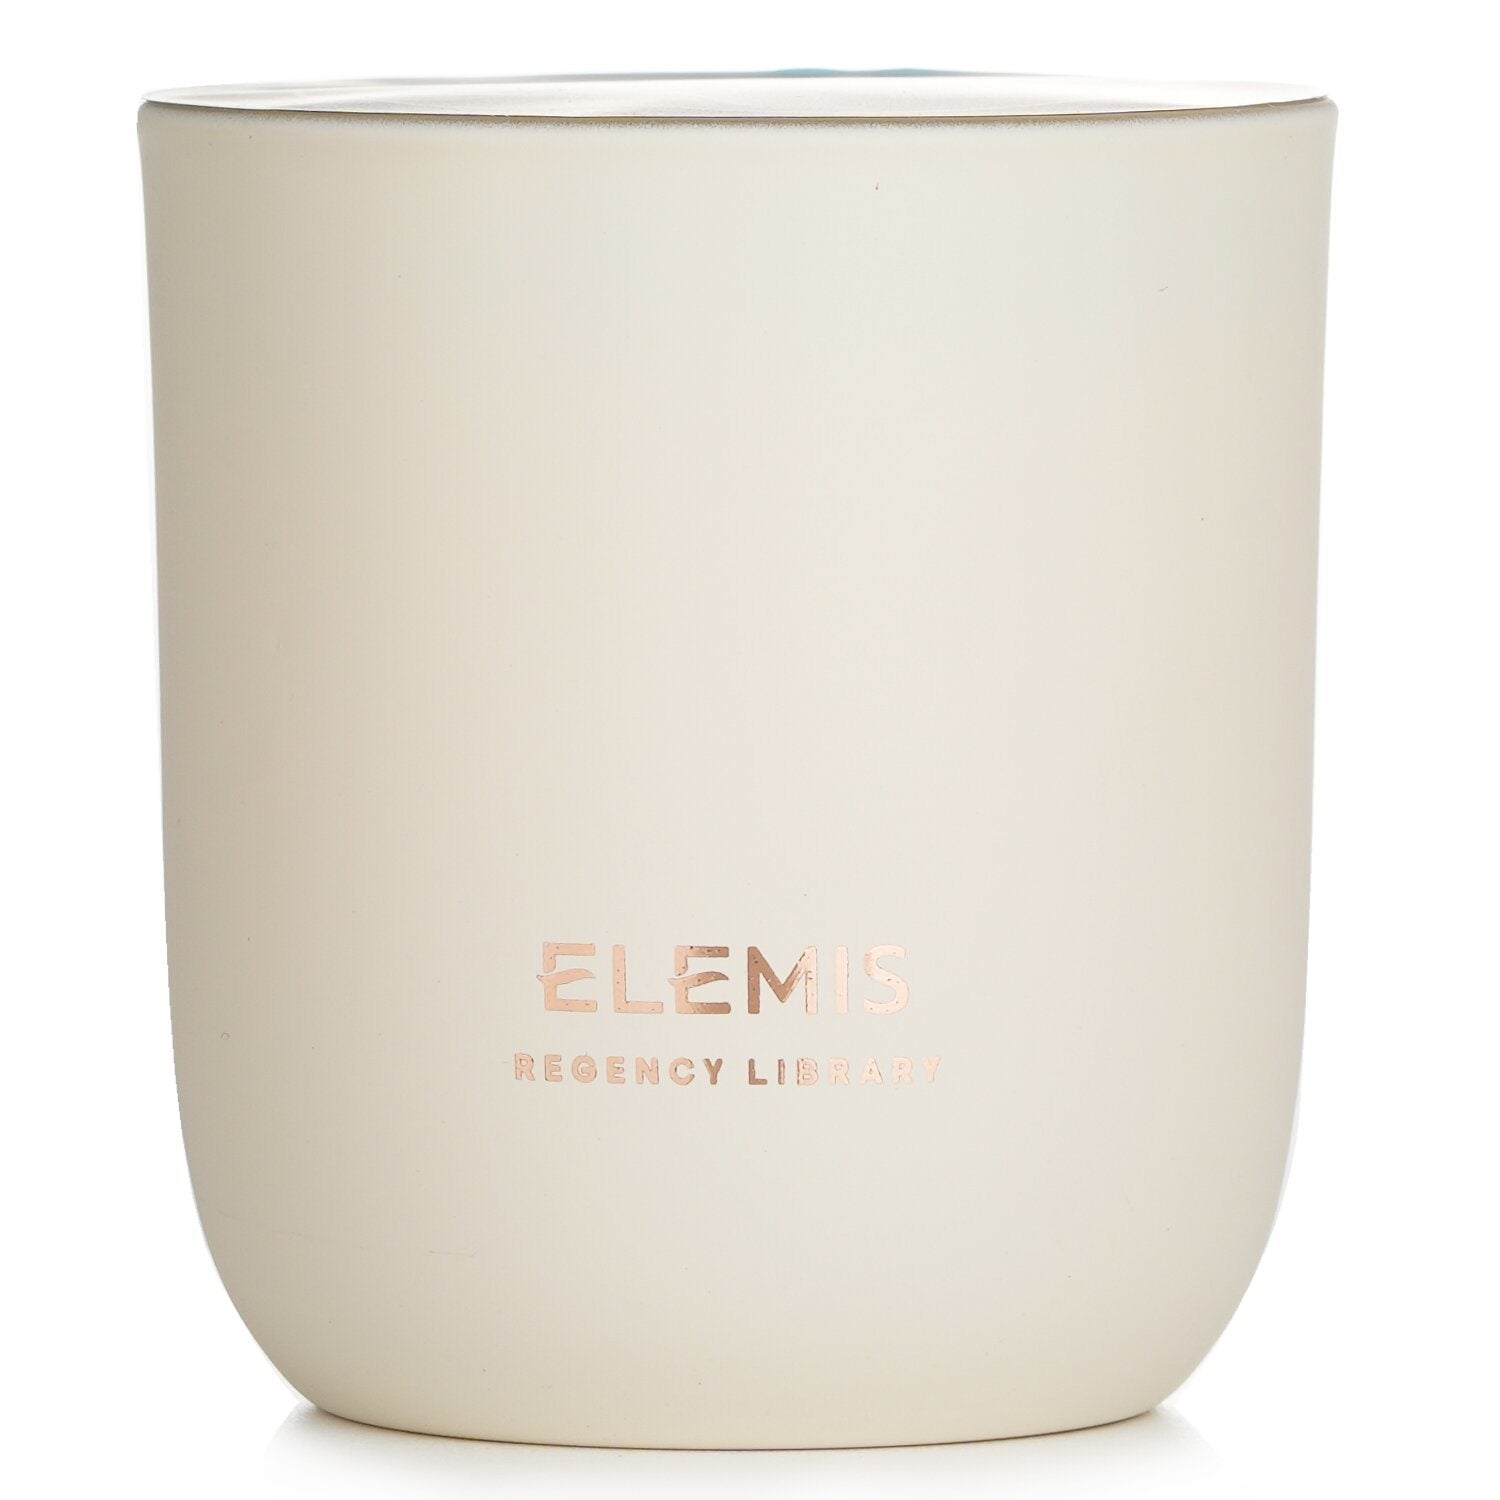 ELEMIS - Scented Candle - Regency Library 888924 220g/7.05oz - lolaluxeshop